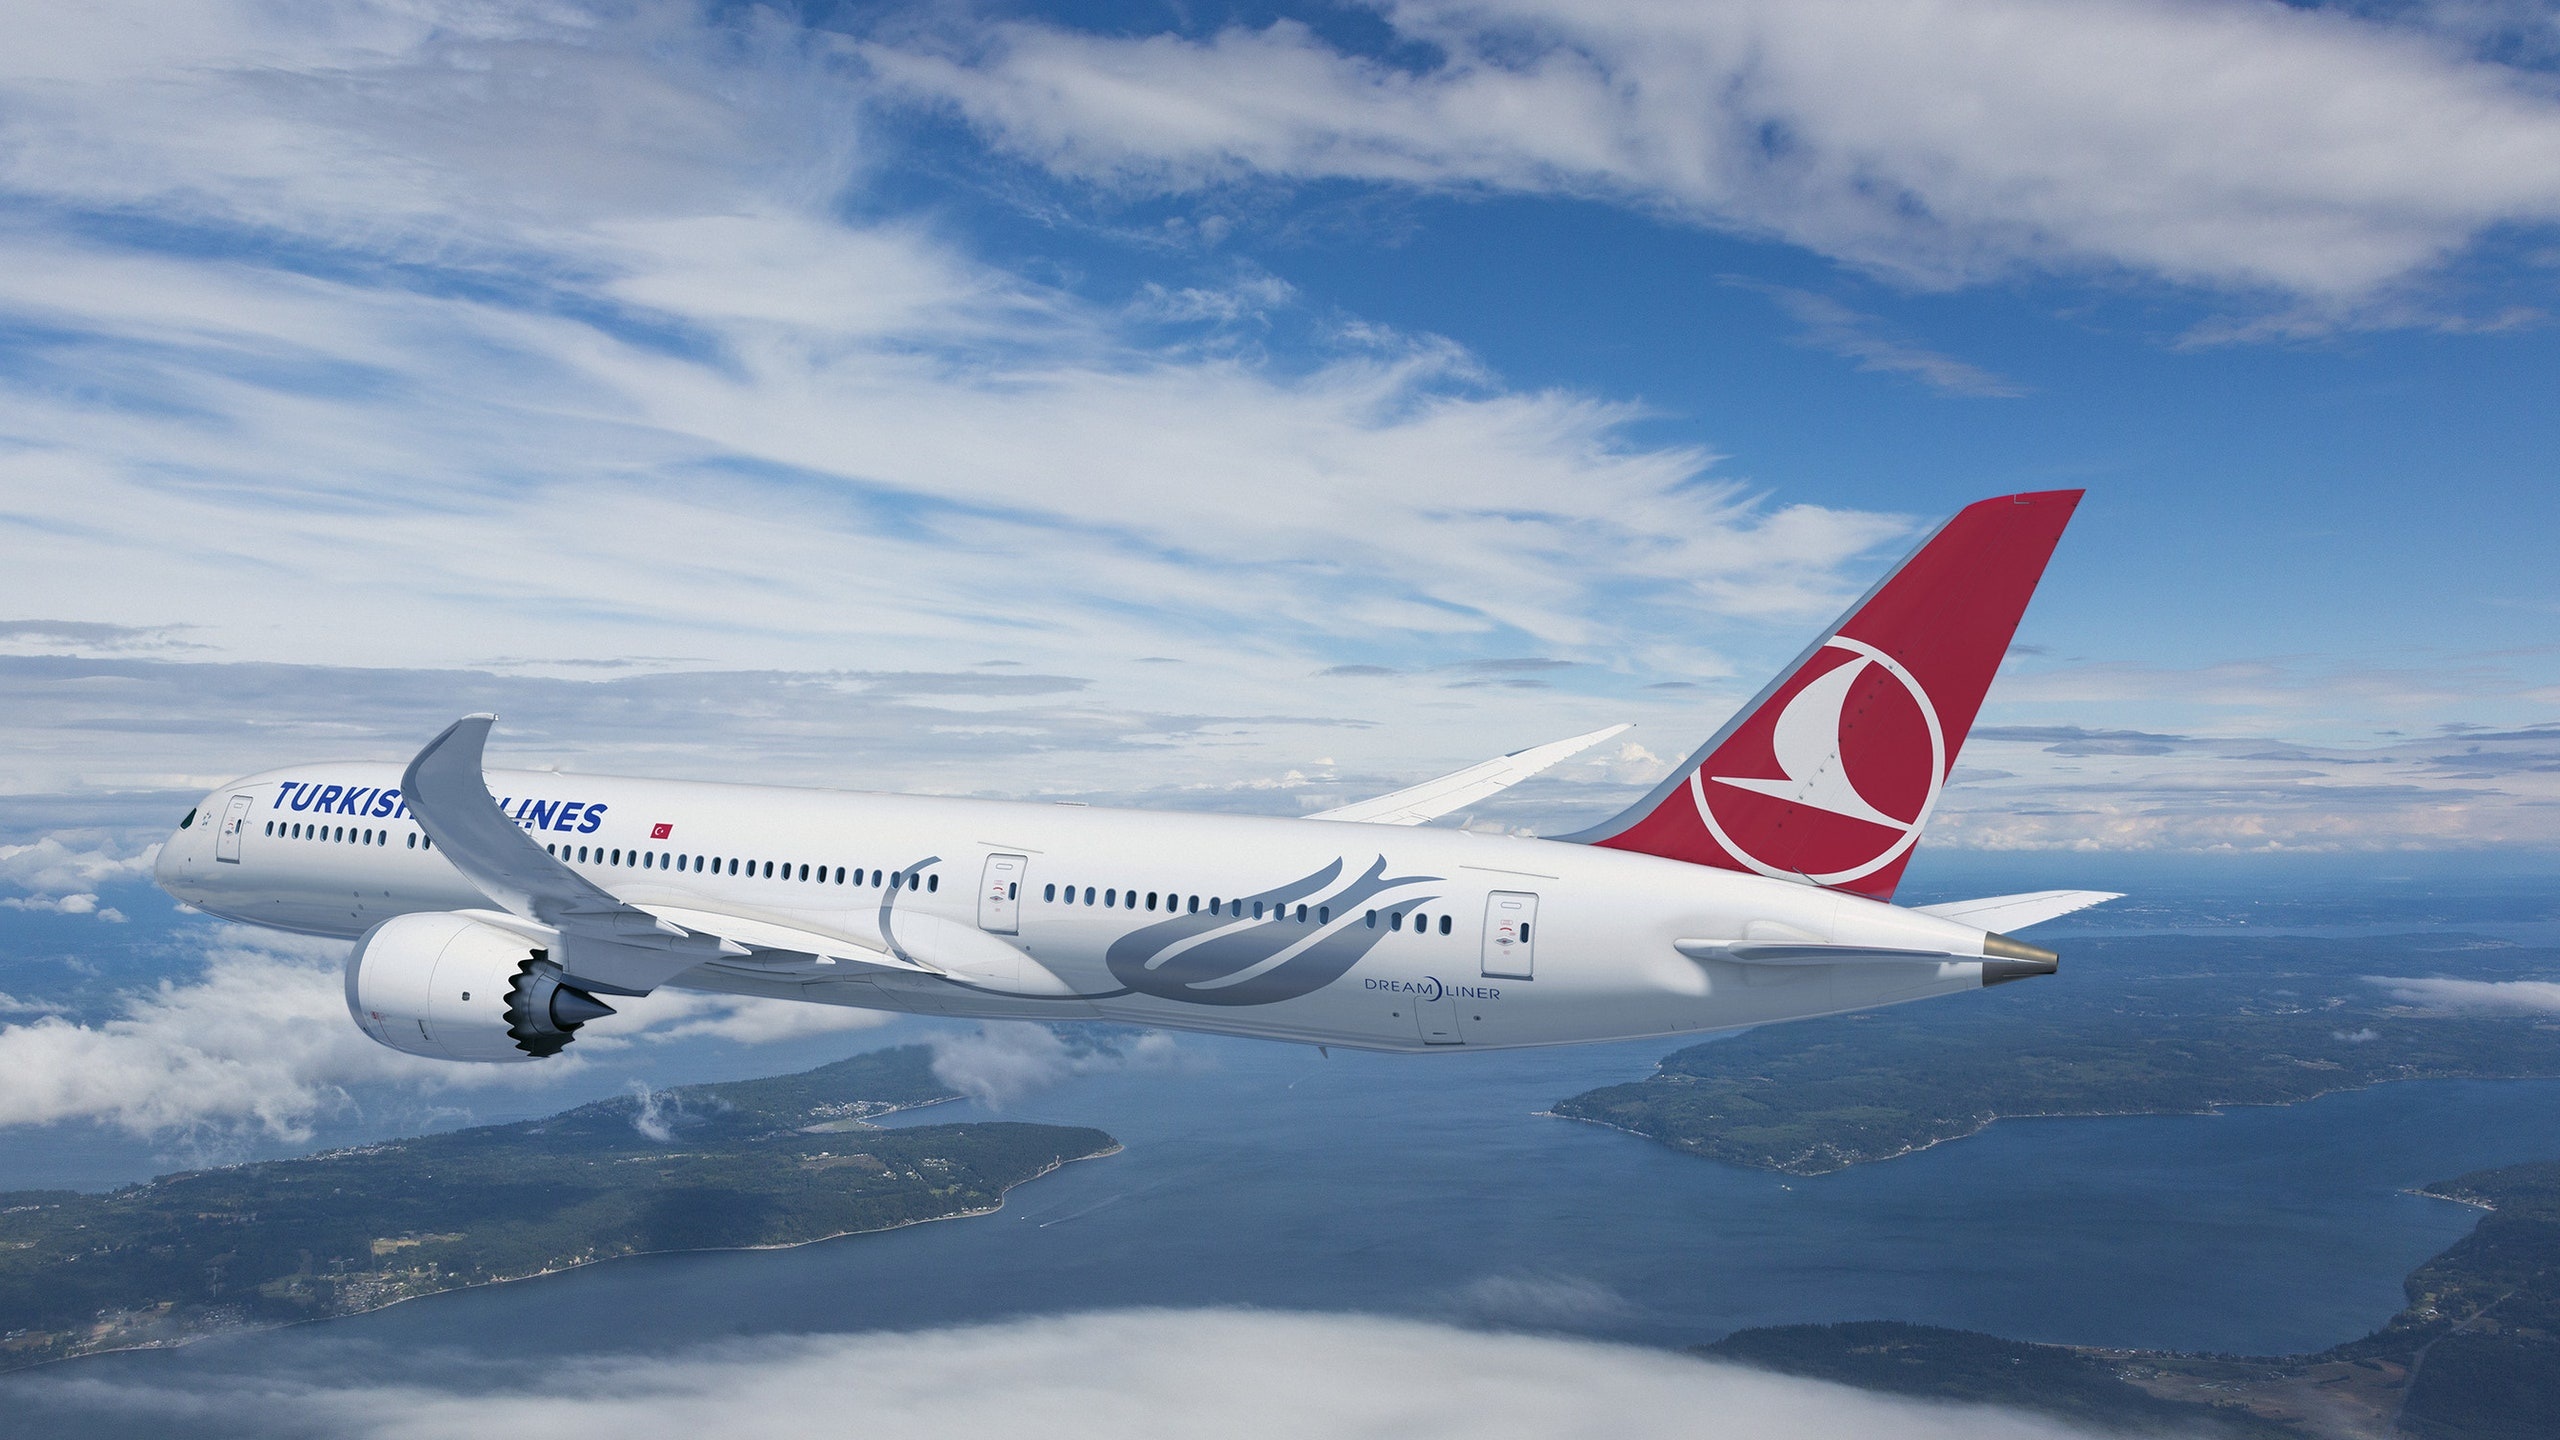 Turkish Airlines wallpapers, High-quality backgrounds, 2560x1440 HD Desktop